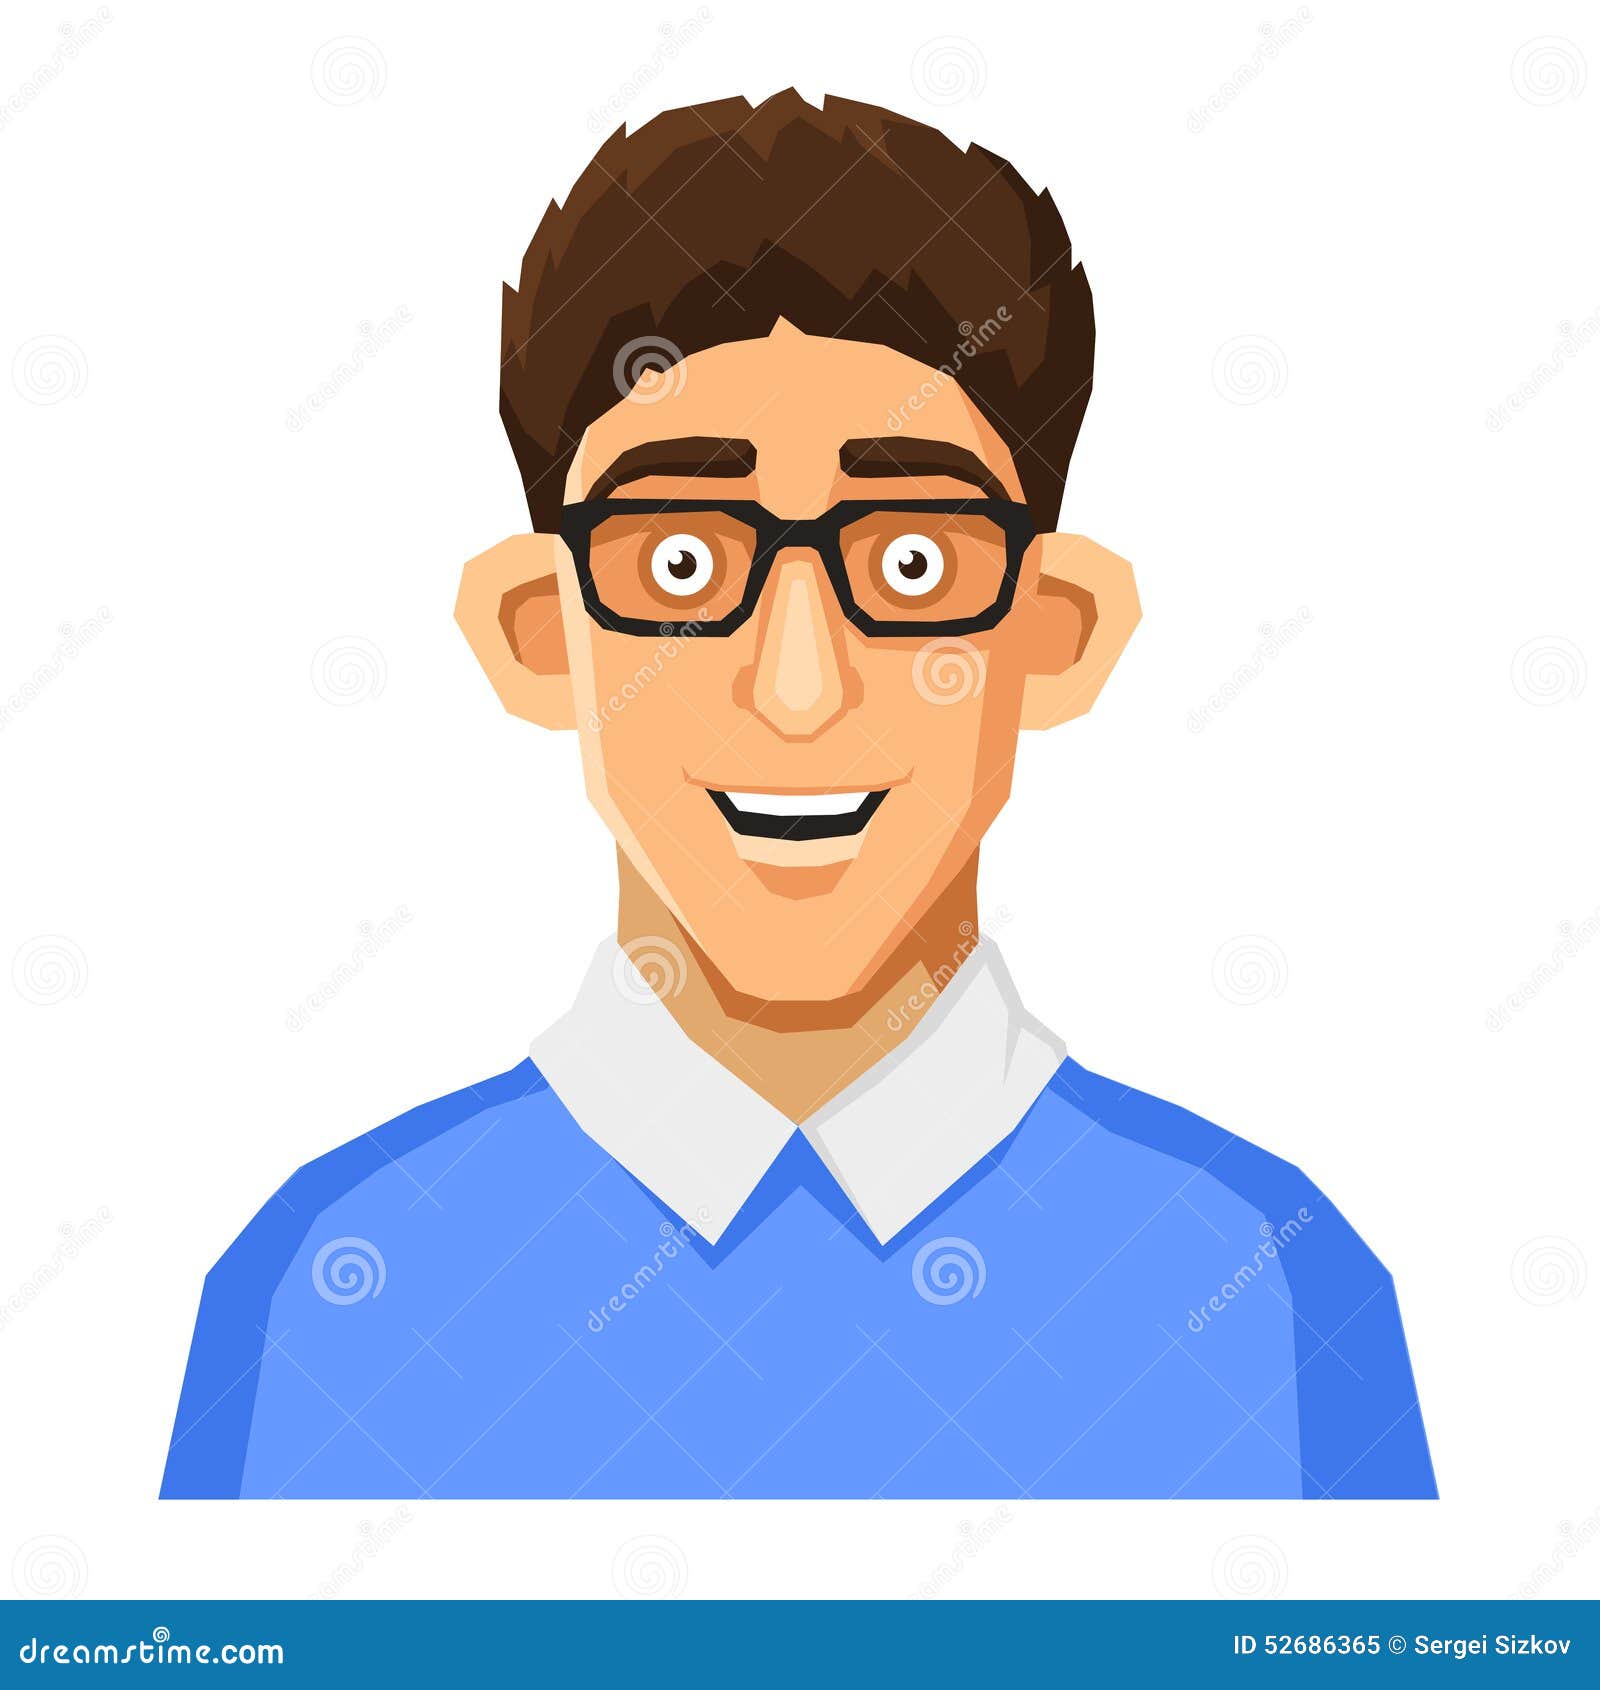 Cartoon Style Portrait of Nerd with Glasses and Stock Vector